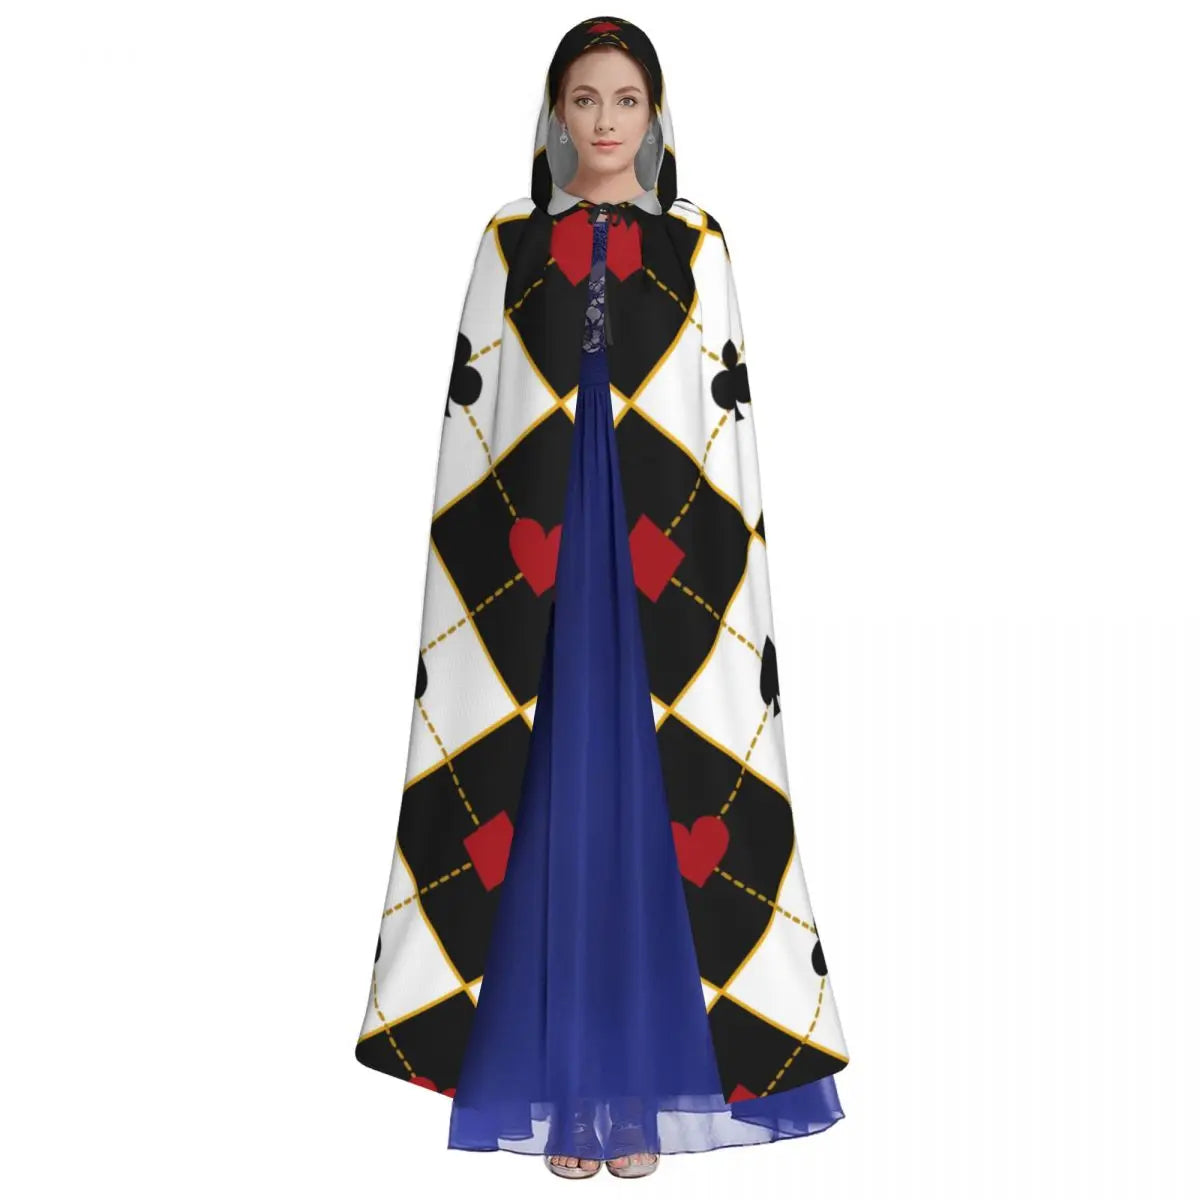 Unisex Adult Card Suits Royal Poker Cloak with Hood Long Witch Costume Cosplay